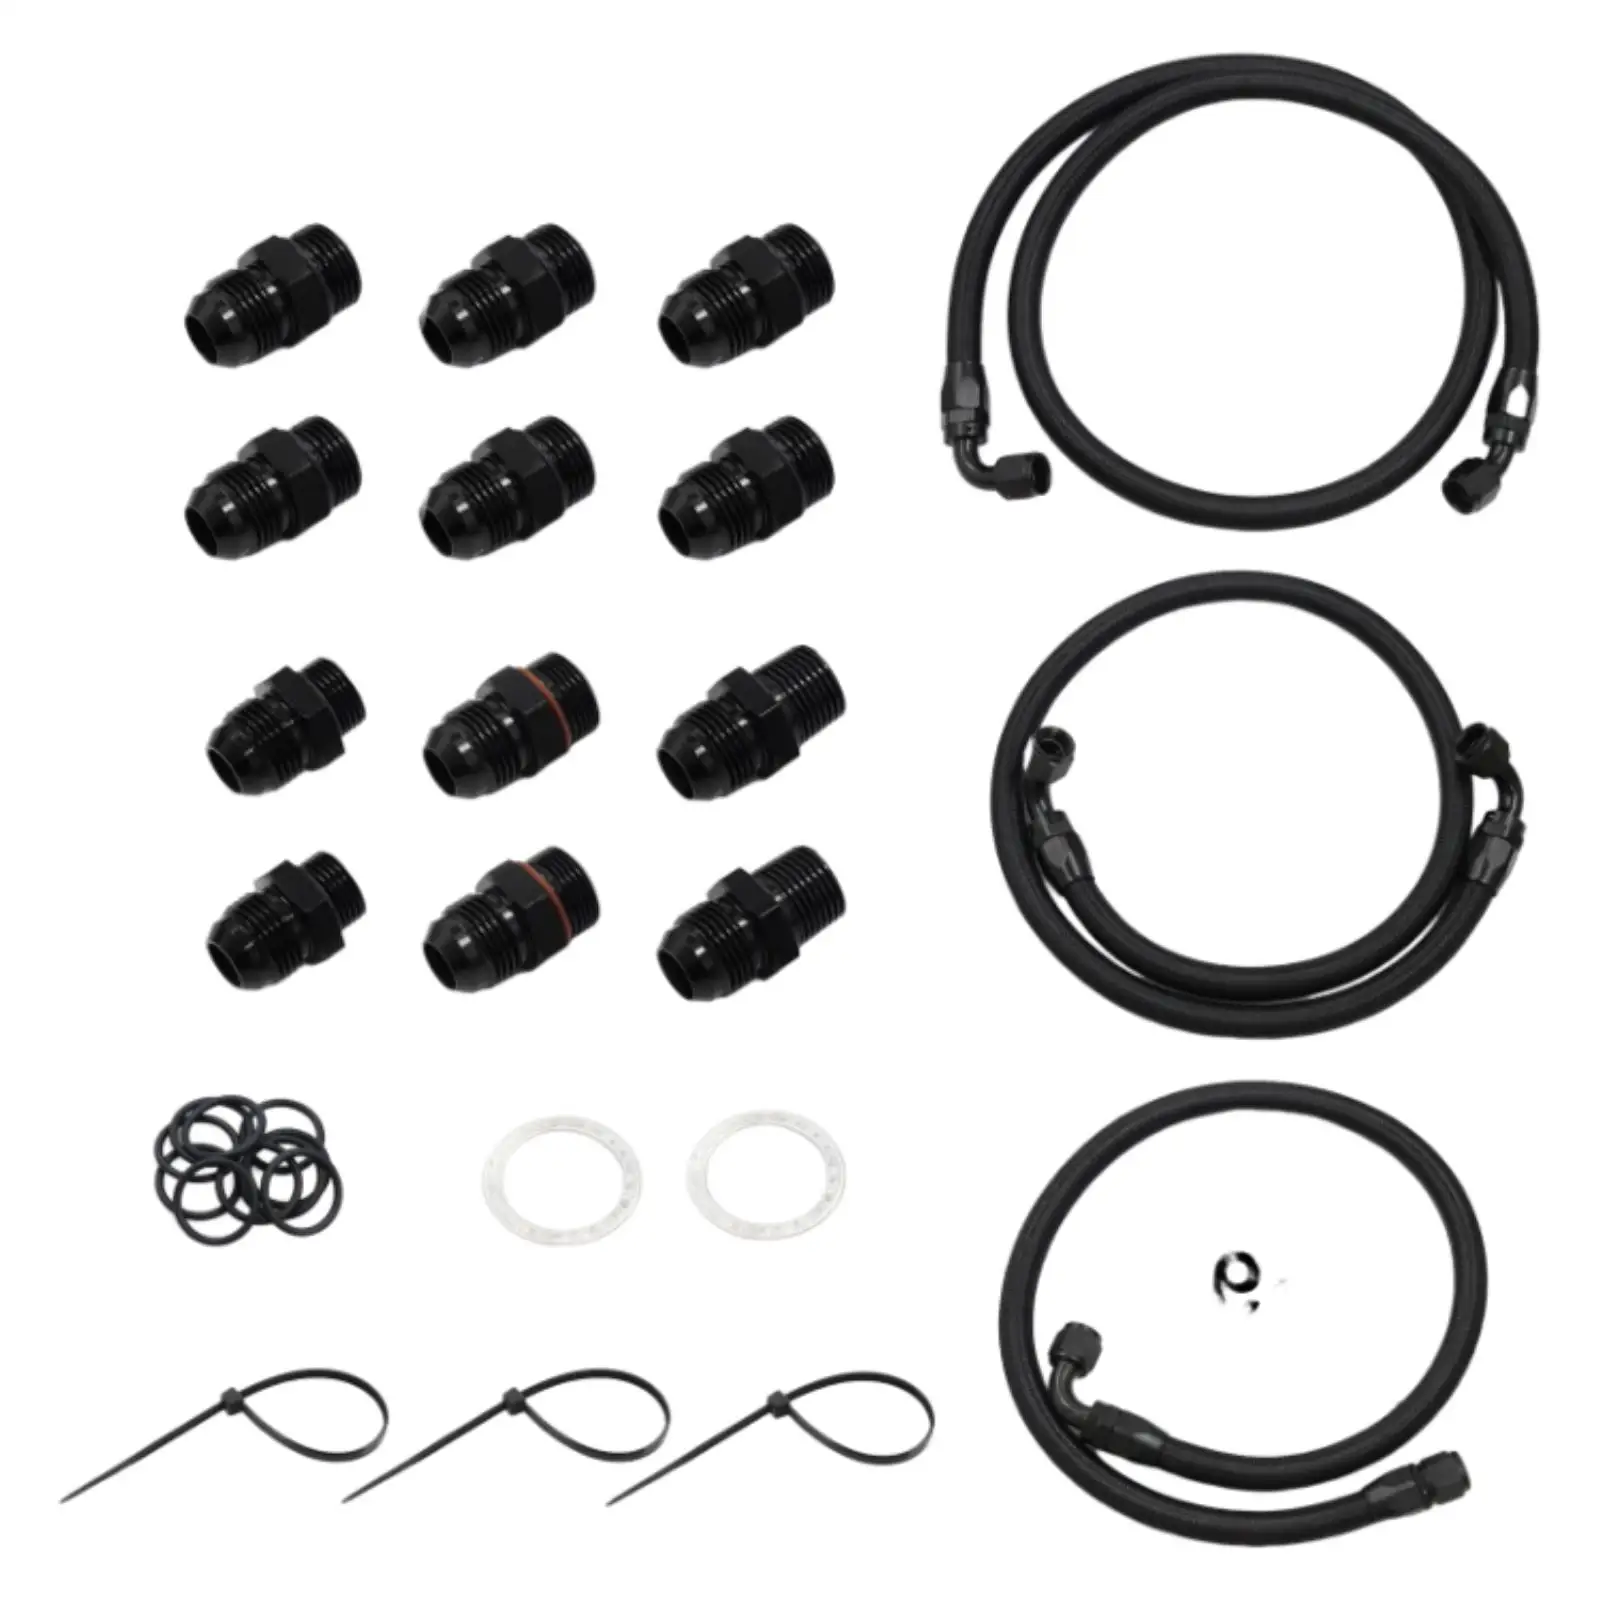 Transmission Cooler Hose Line Kit with Adapters Durable Replacement Accessories for GM 2001 to 2005 6.6 lb7 Lly Duramax